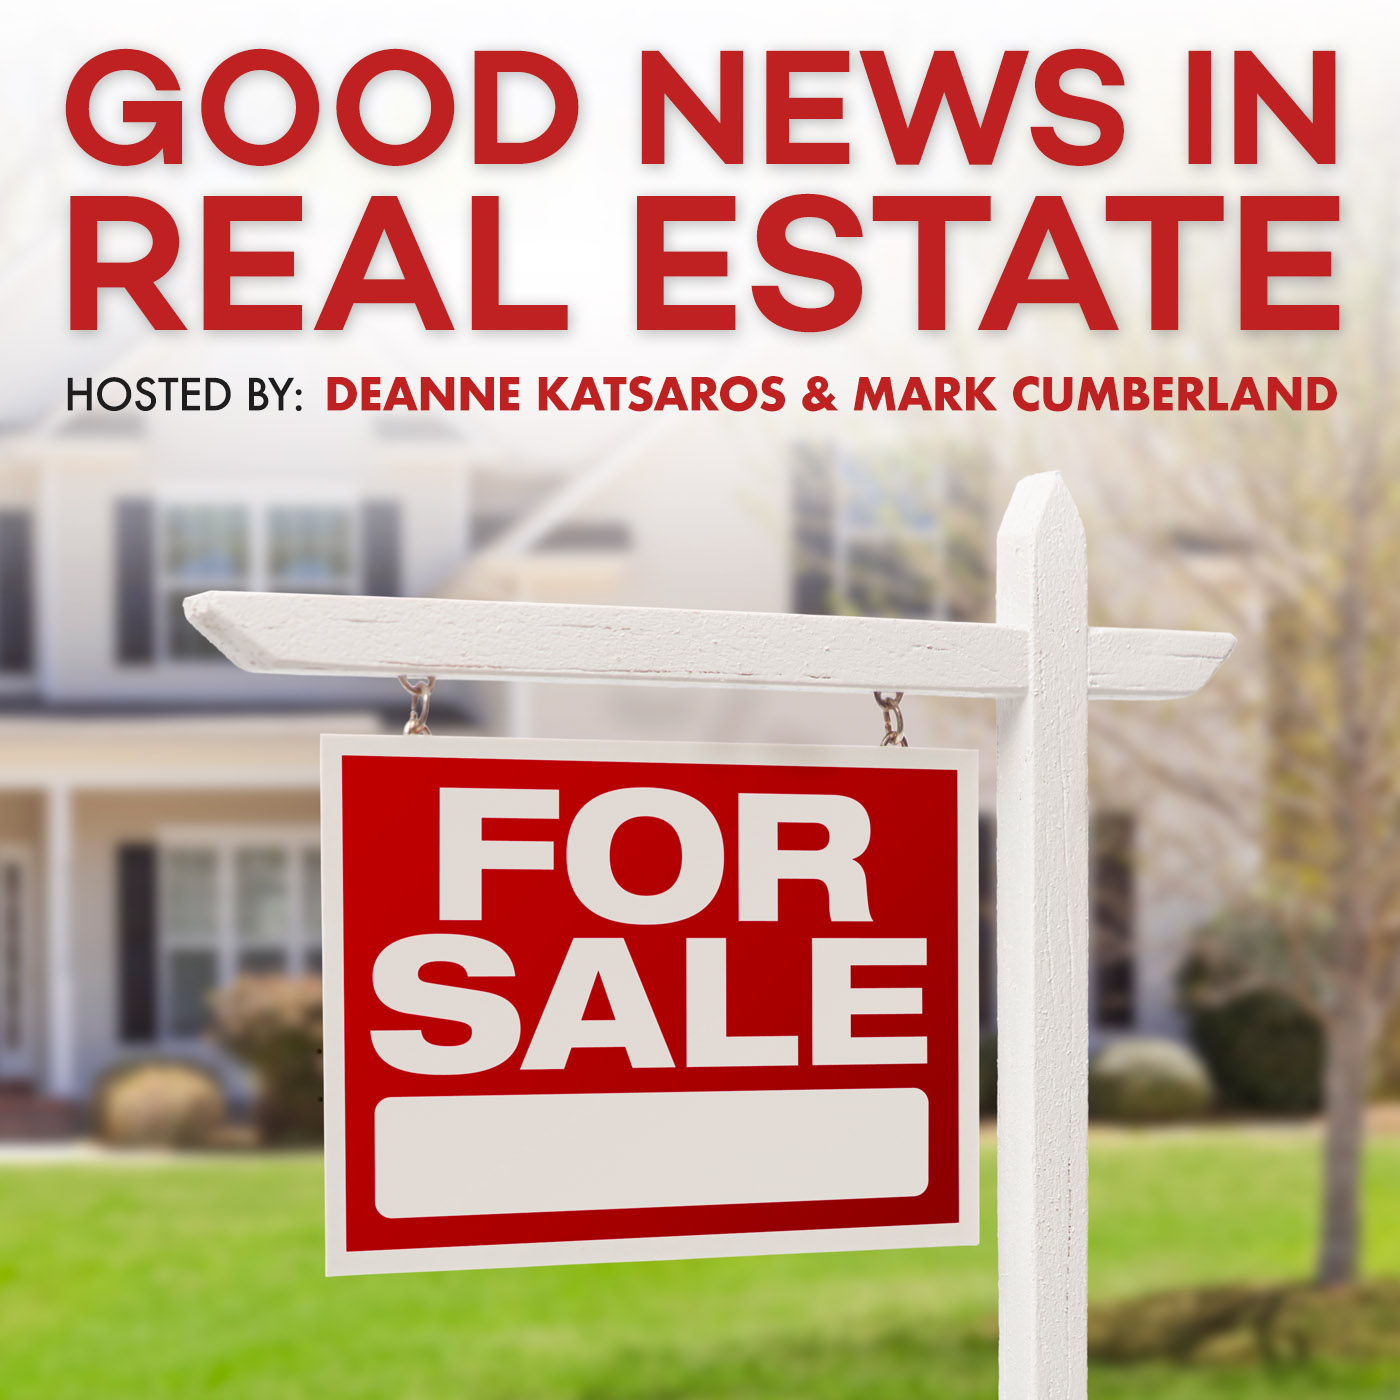 August 2, 2020 | Good News In Real Estate